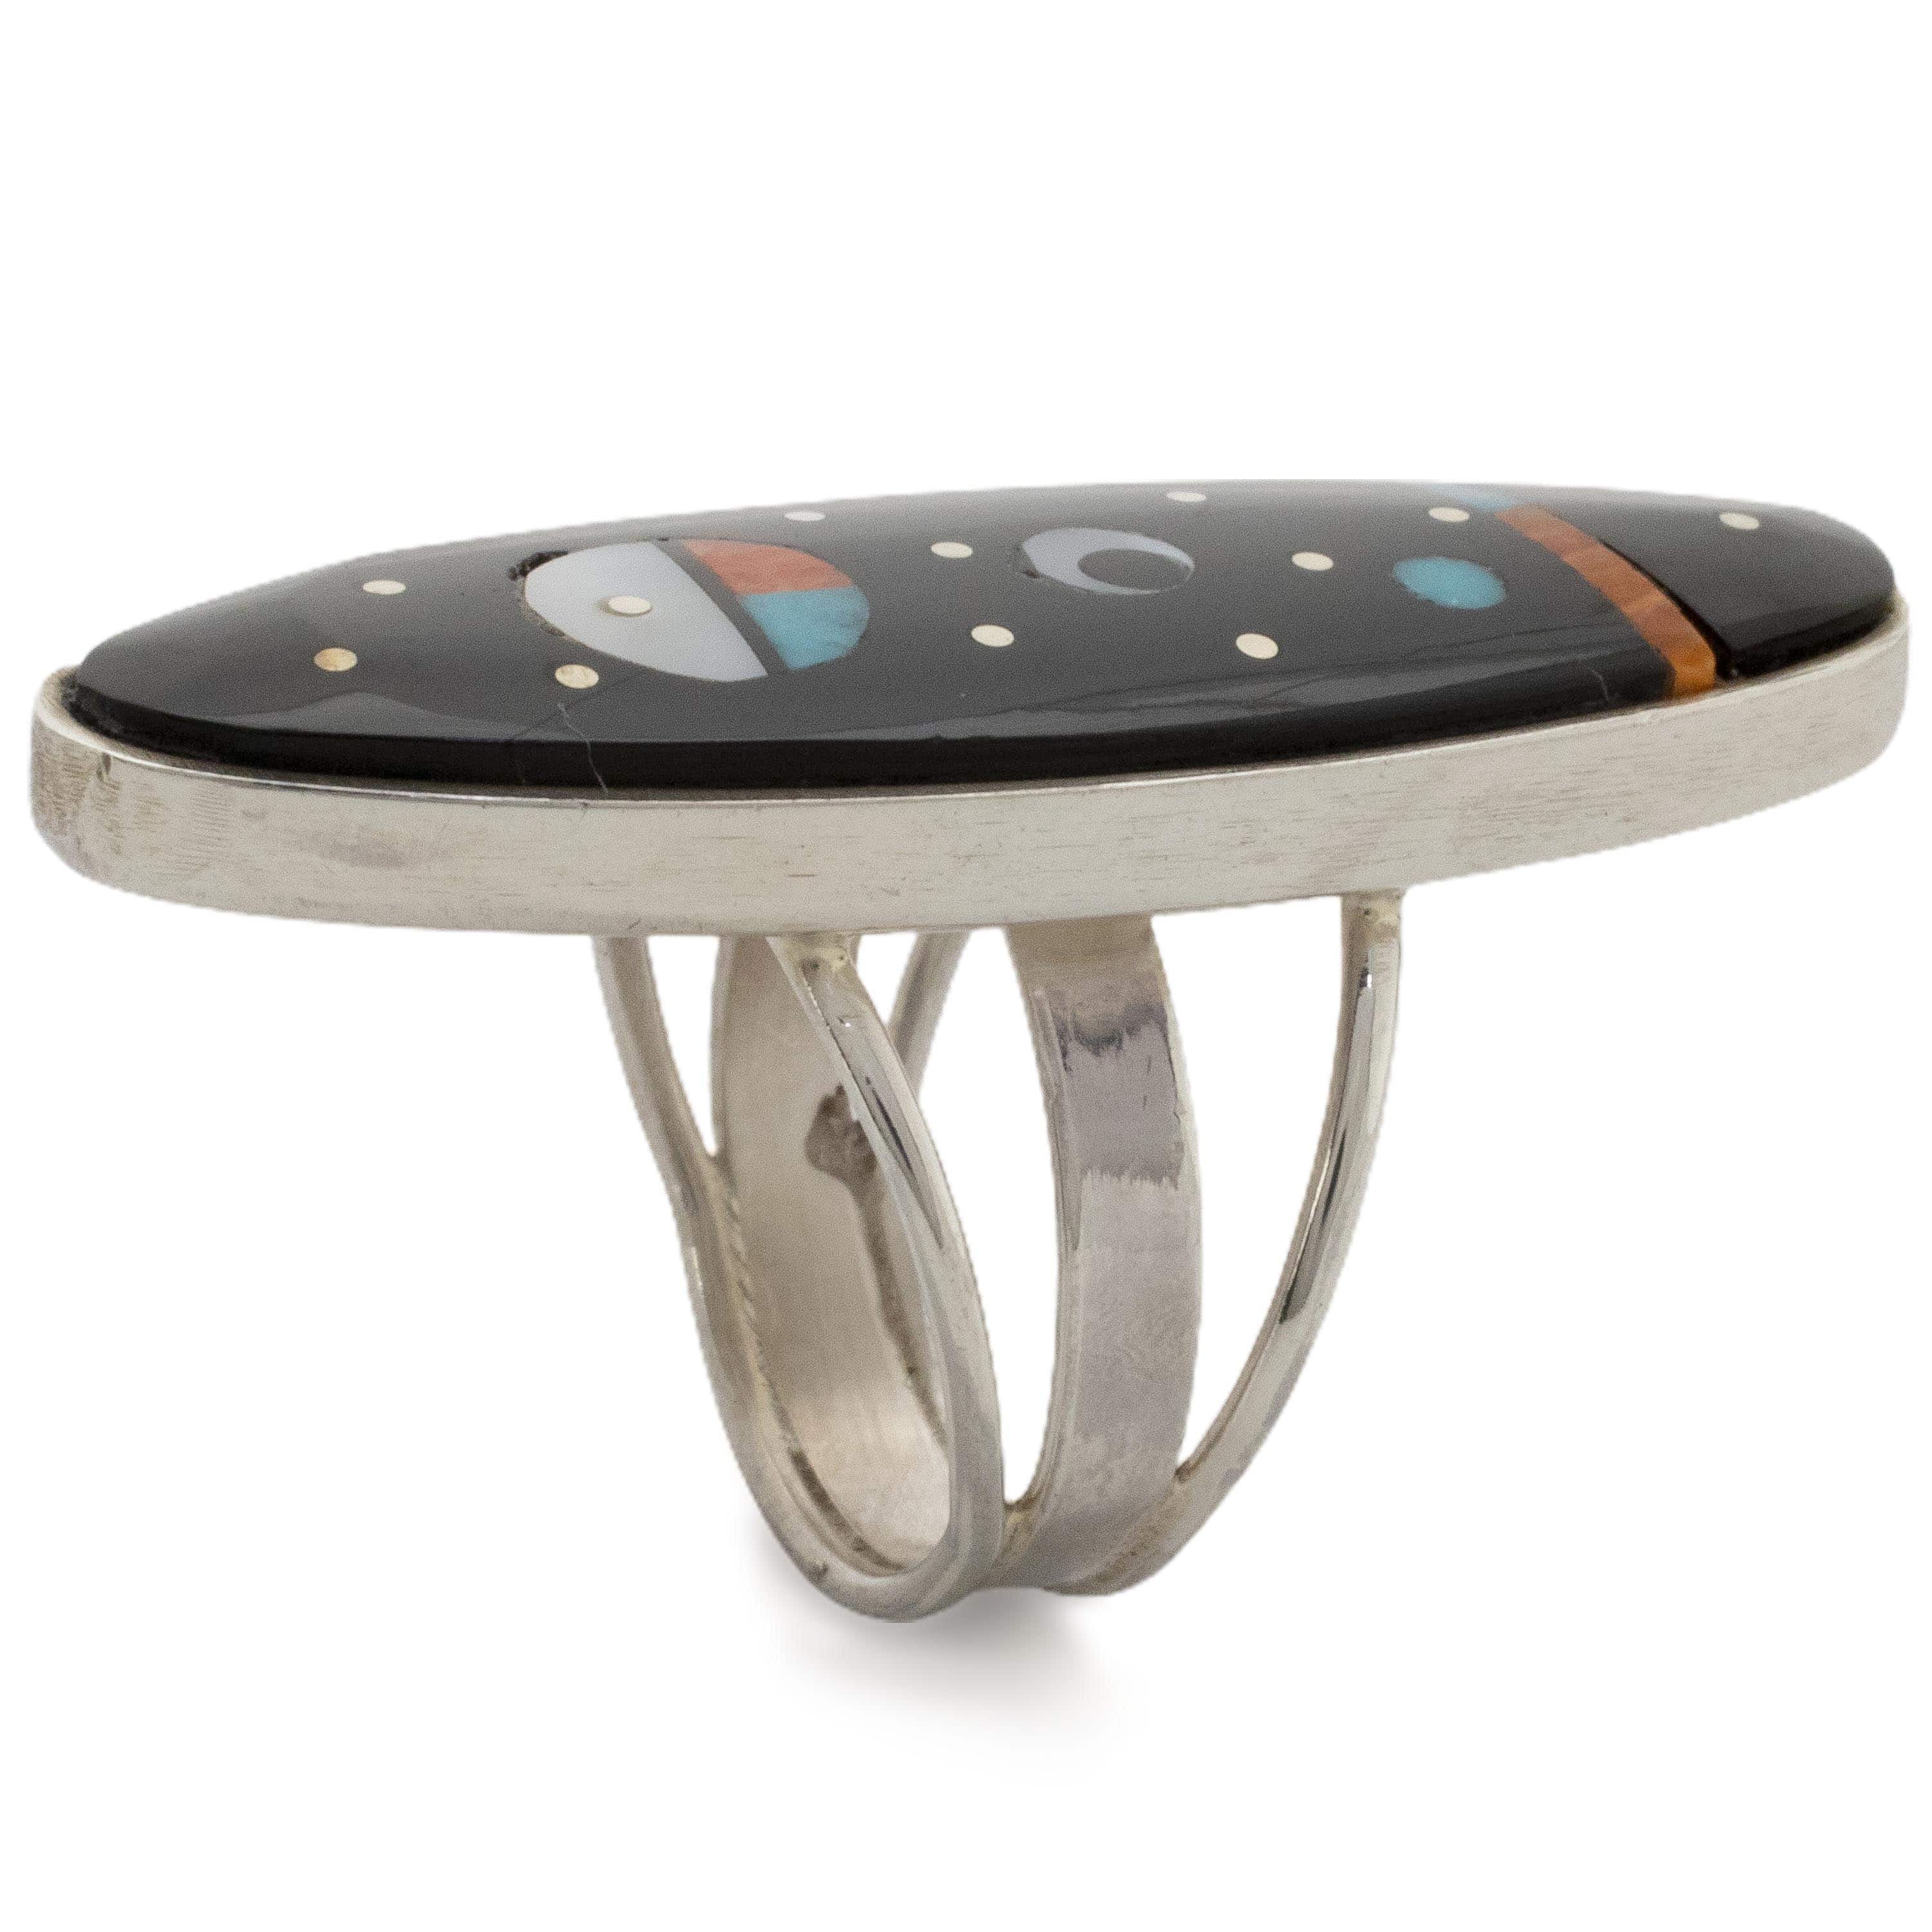 Kalifano Native American Jewelry Harold Smith Navajo Jet, Mother of Pearl, Turquoise, and Orange Spiny Oyster Shell Inlay USA Native American Made 925 Sterling Silver Ring